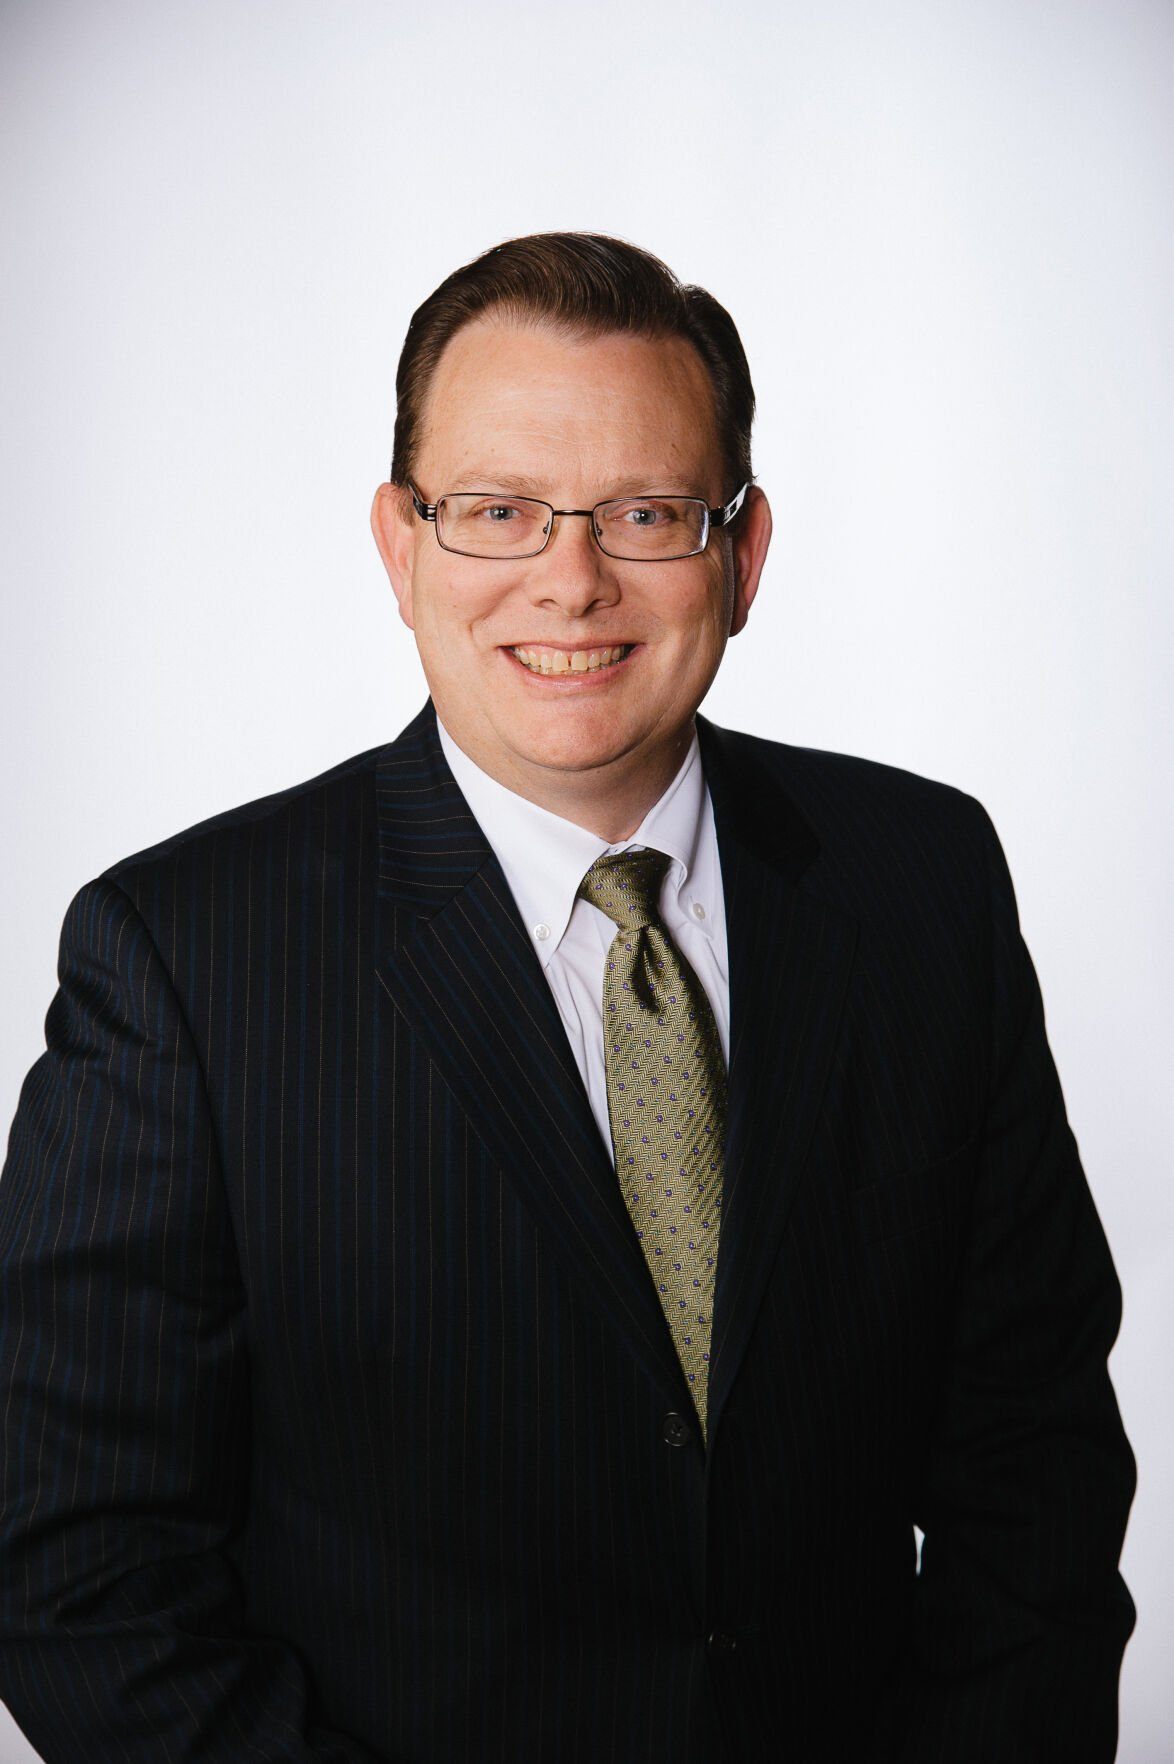 Drew Townsend, President and CEO of Dubuque Bank & Trust.    PHOTO CREDIT: Contributed